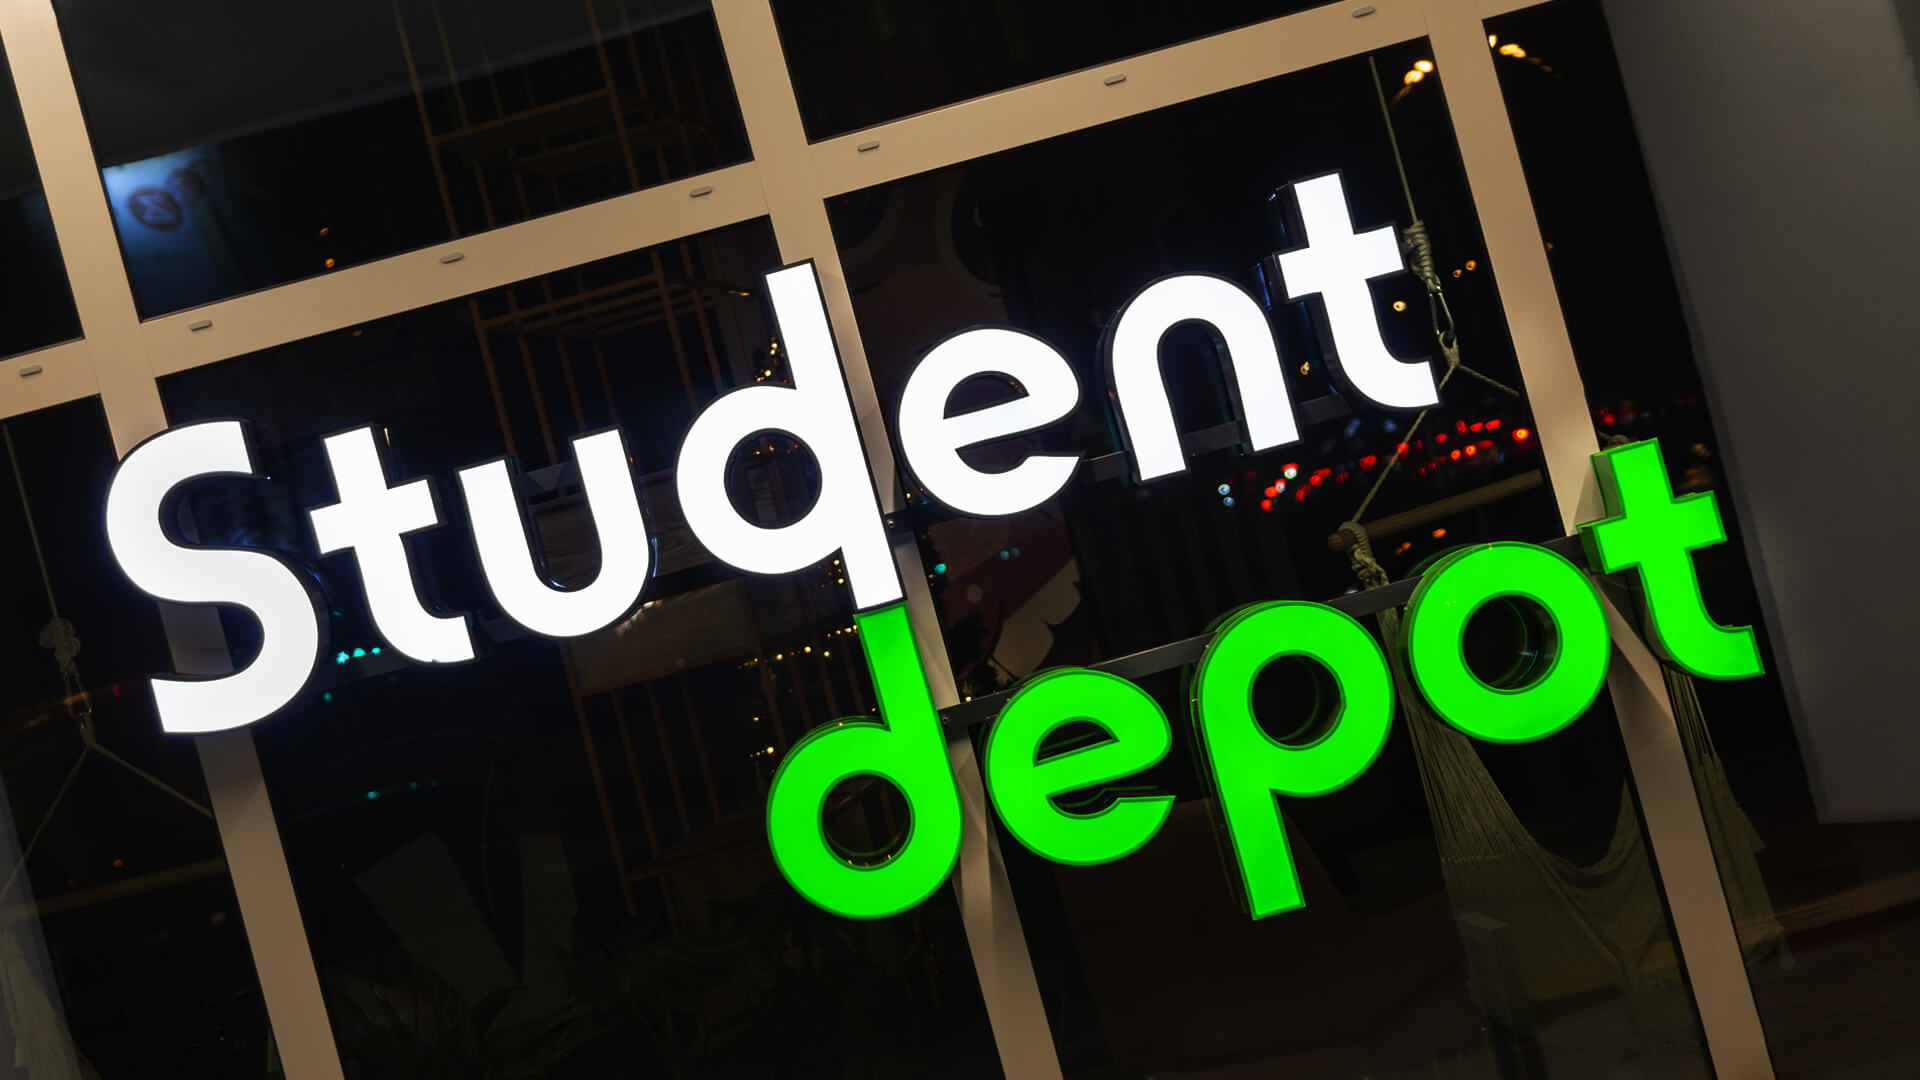 student depot - student-depot-spatial-lettering-lettering-in-entry-lettering-on-a-rail-lettering-on-a-green-plate-lettering-on-a-order-logo-firm-writing-lettering-on-a-height-eye-lettering-from-plexi-gdansk (1)